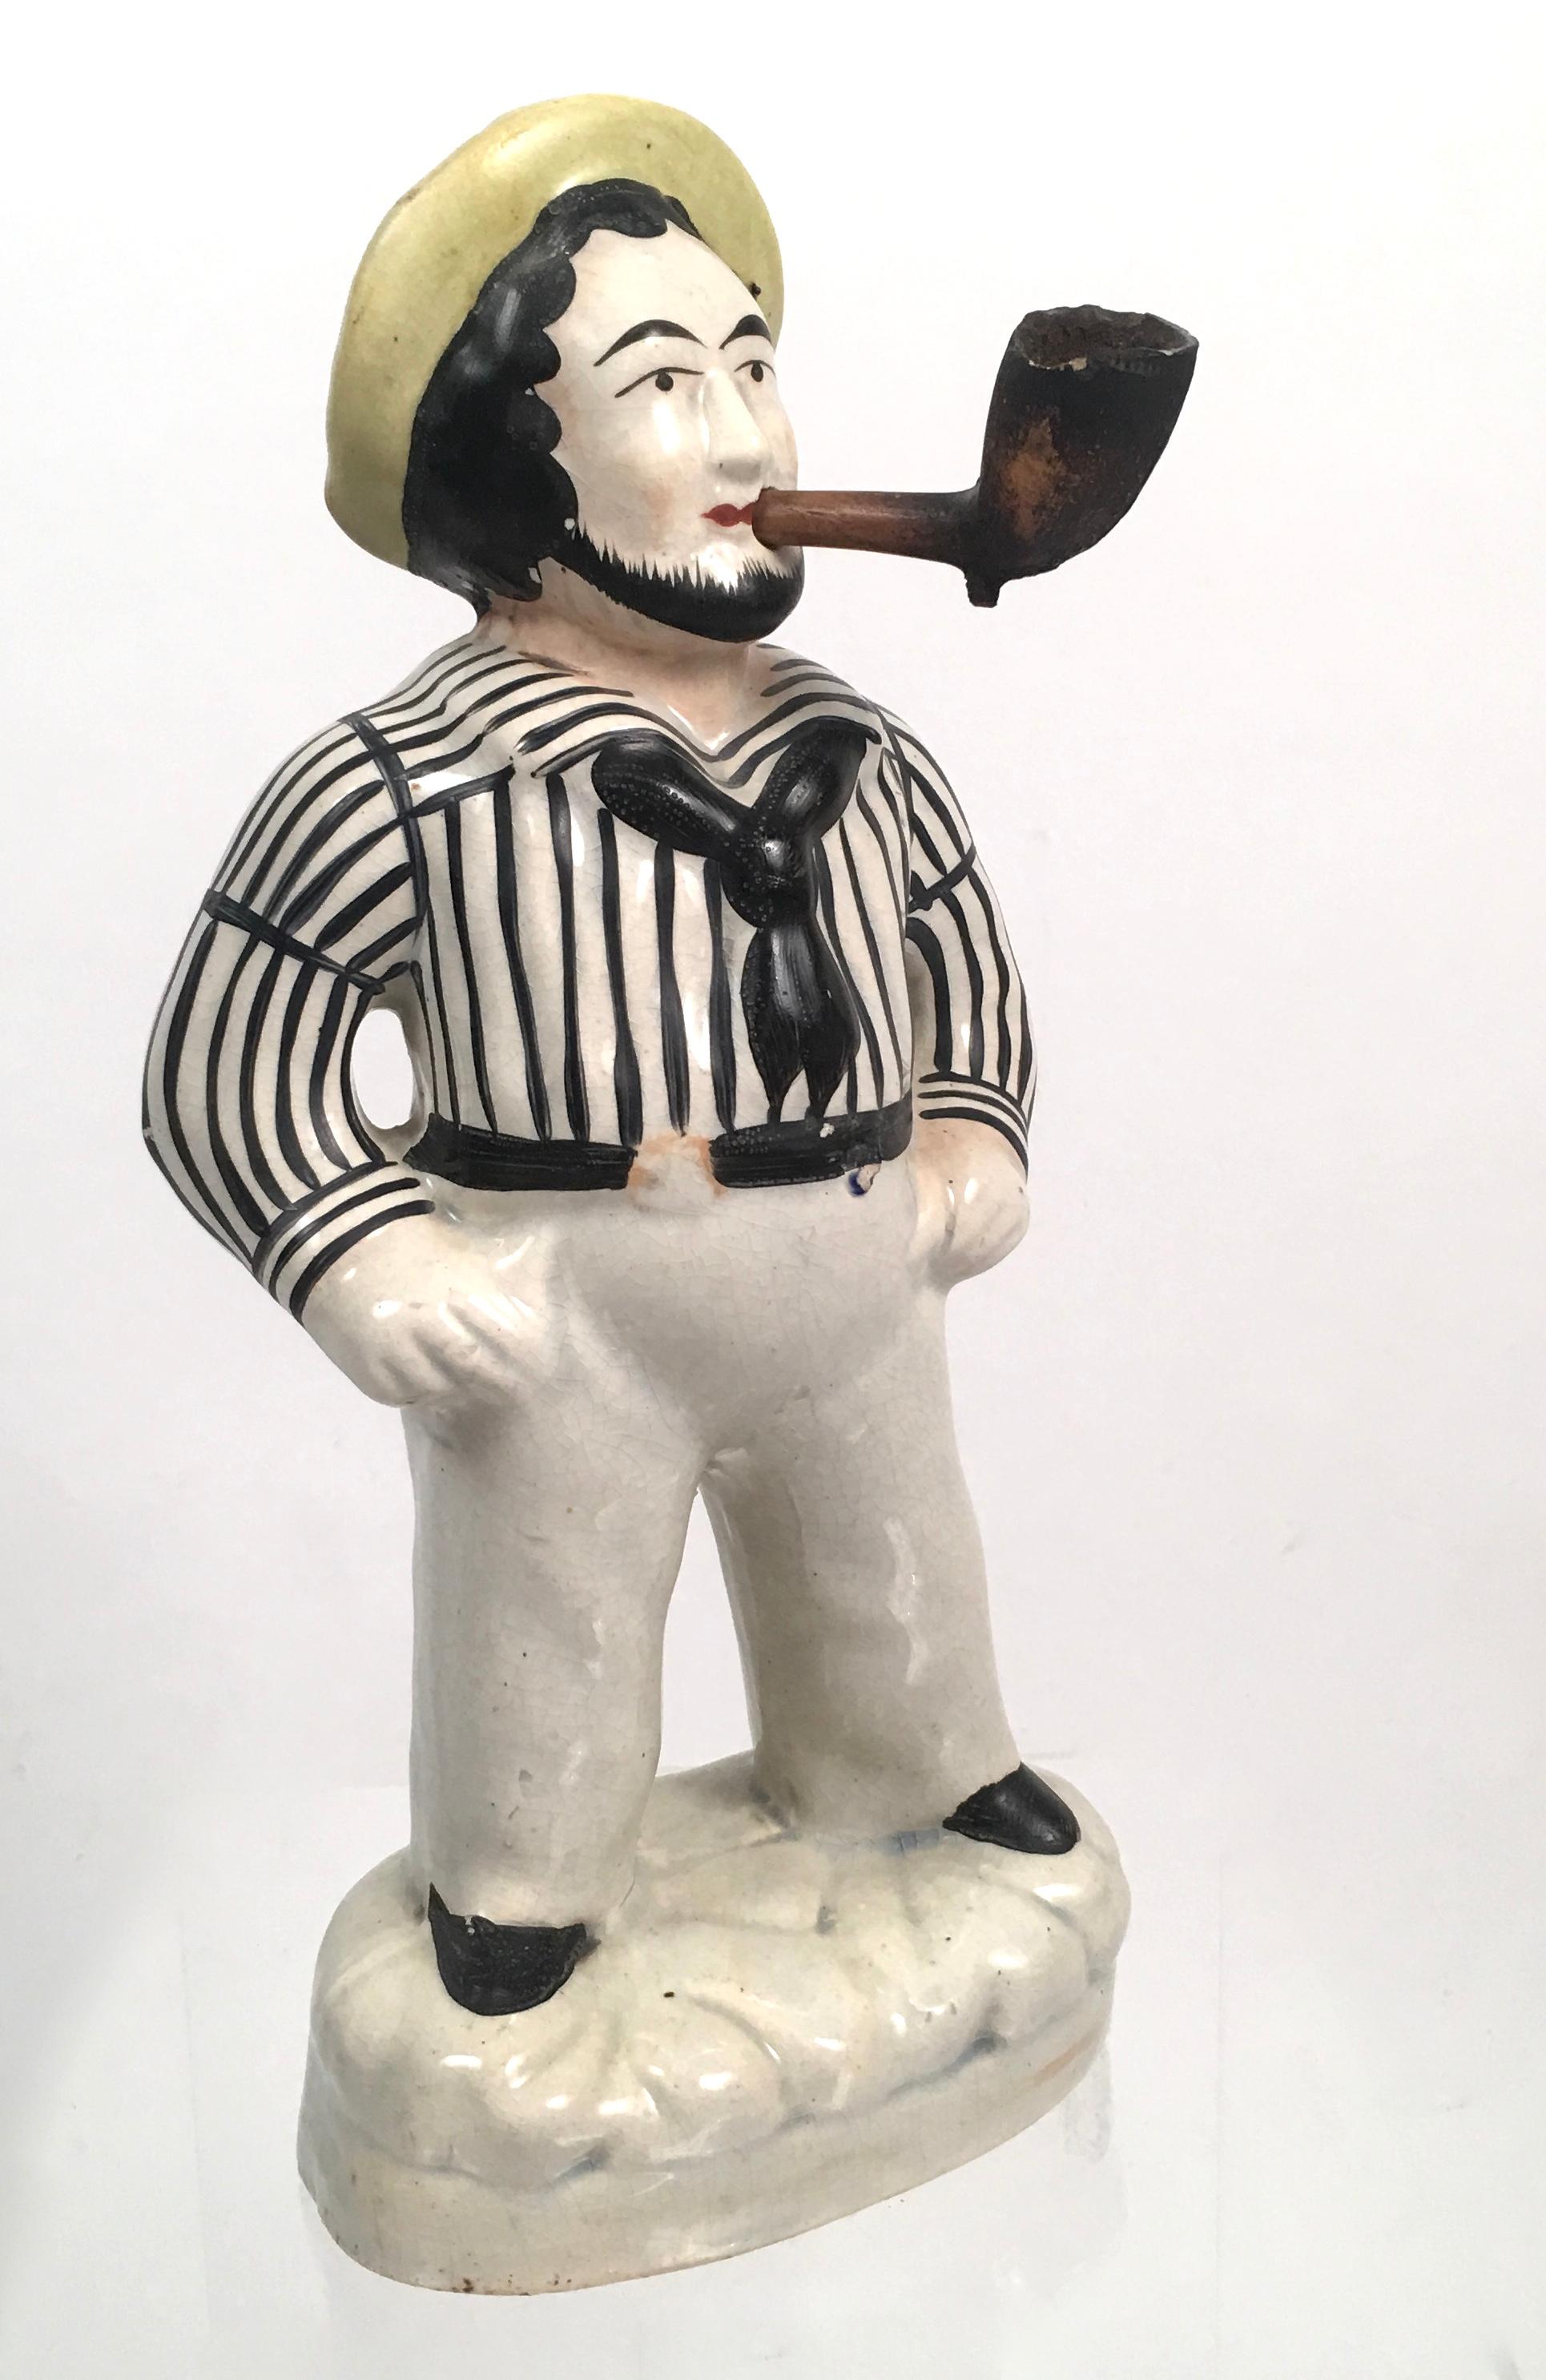 A hand-painted Staffordshire pottery figure of a sailor, English, circa 1840, commonly referred to as Jack Tar, depicting a bearded sailor wearing a yellow cap and traditional blue and white striped shirt, navy blue scarf, white pants with black